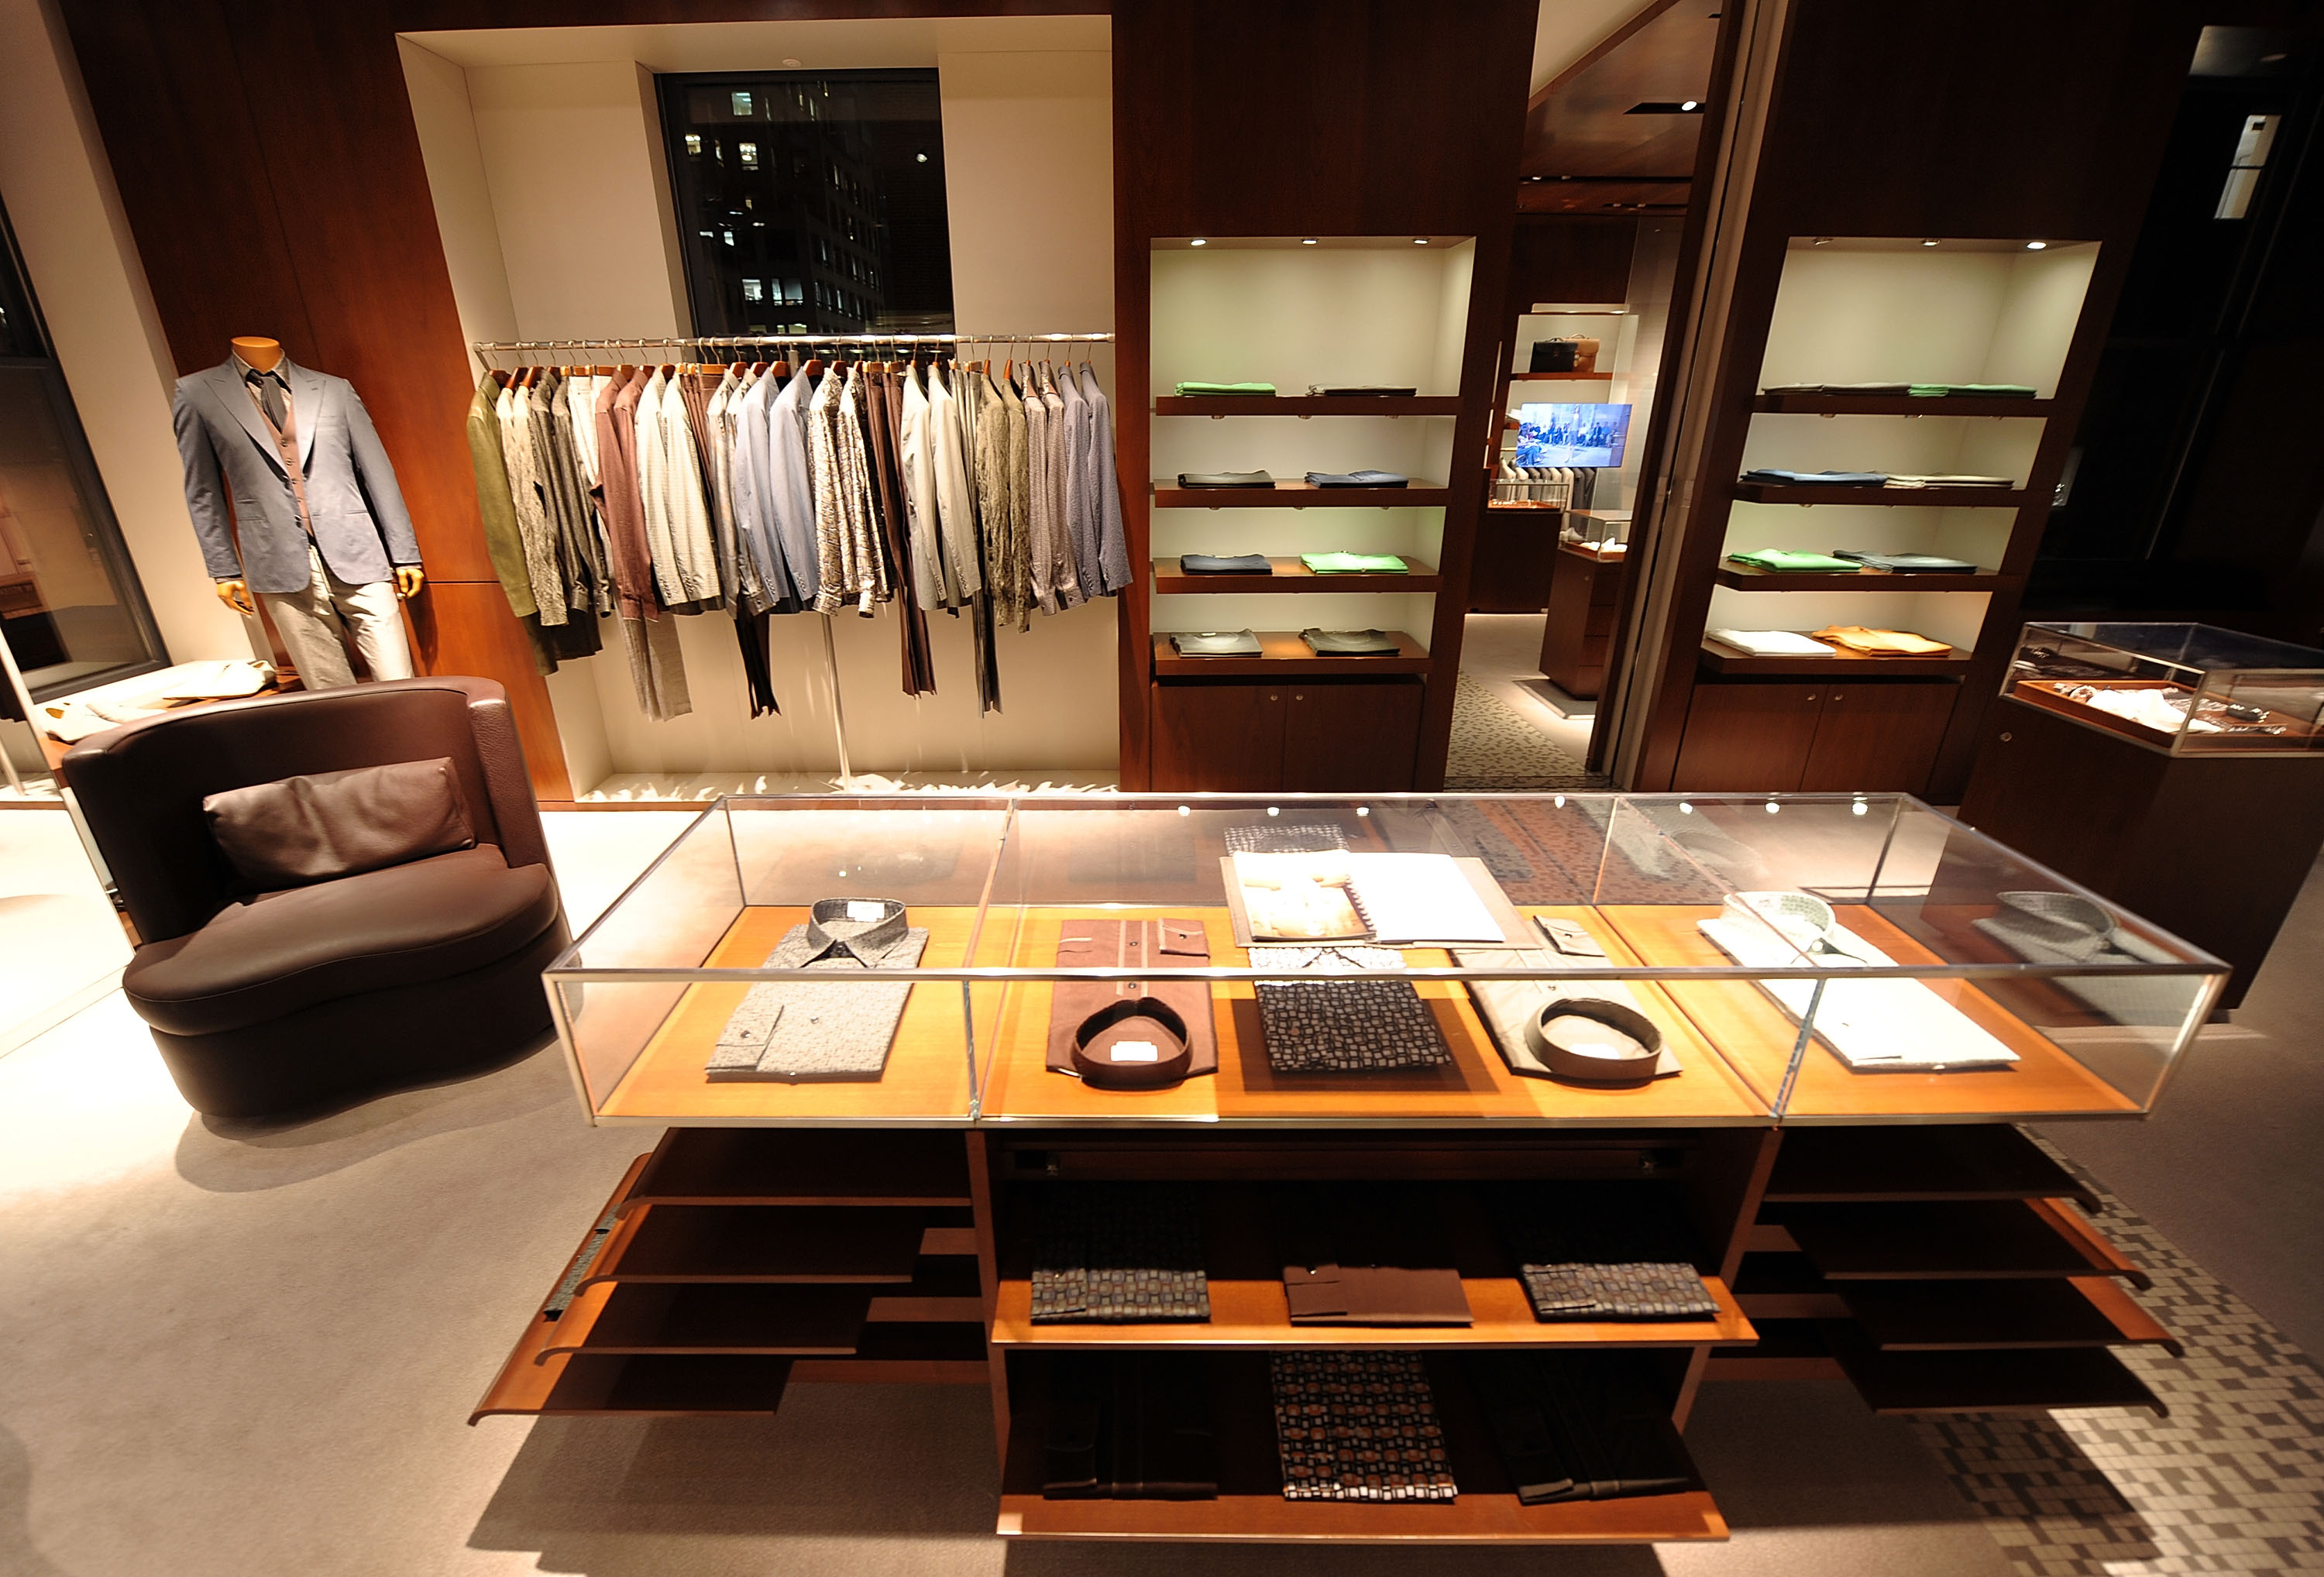 Hermes Opens a New Kind of Shop in NYC Meatpacking District